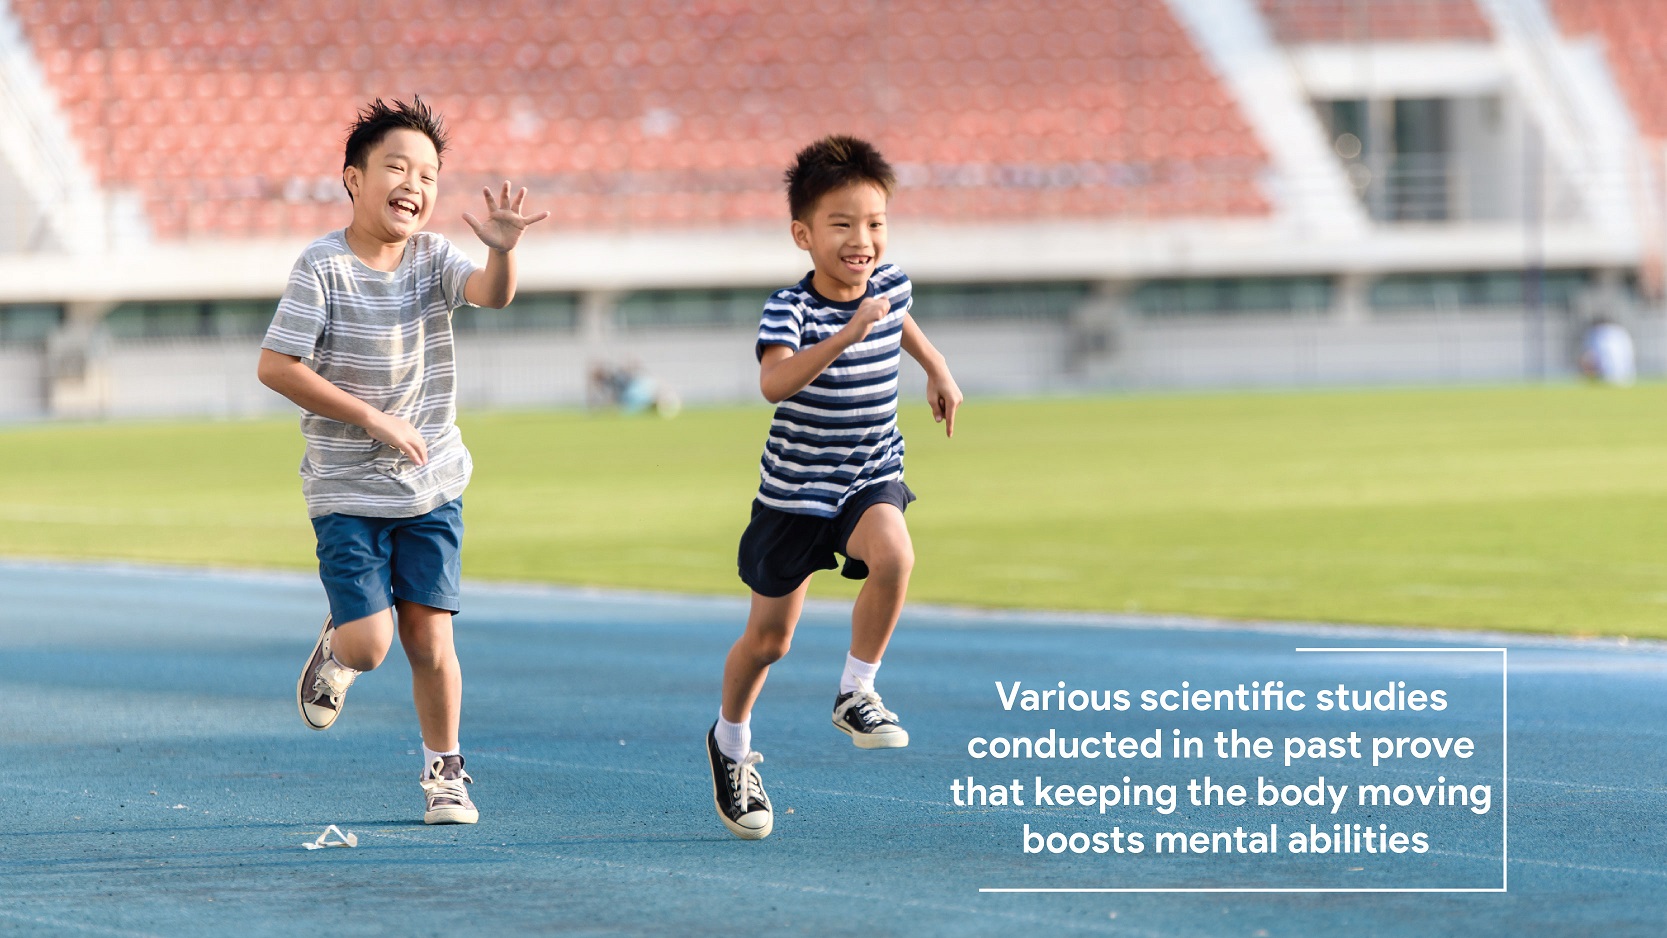 Various scientific studies conducted in the past prove that keeping the body moving boosts mental abilities